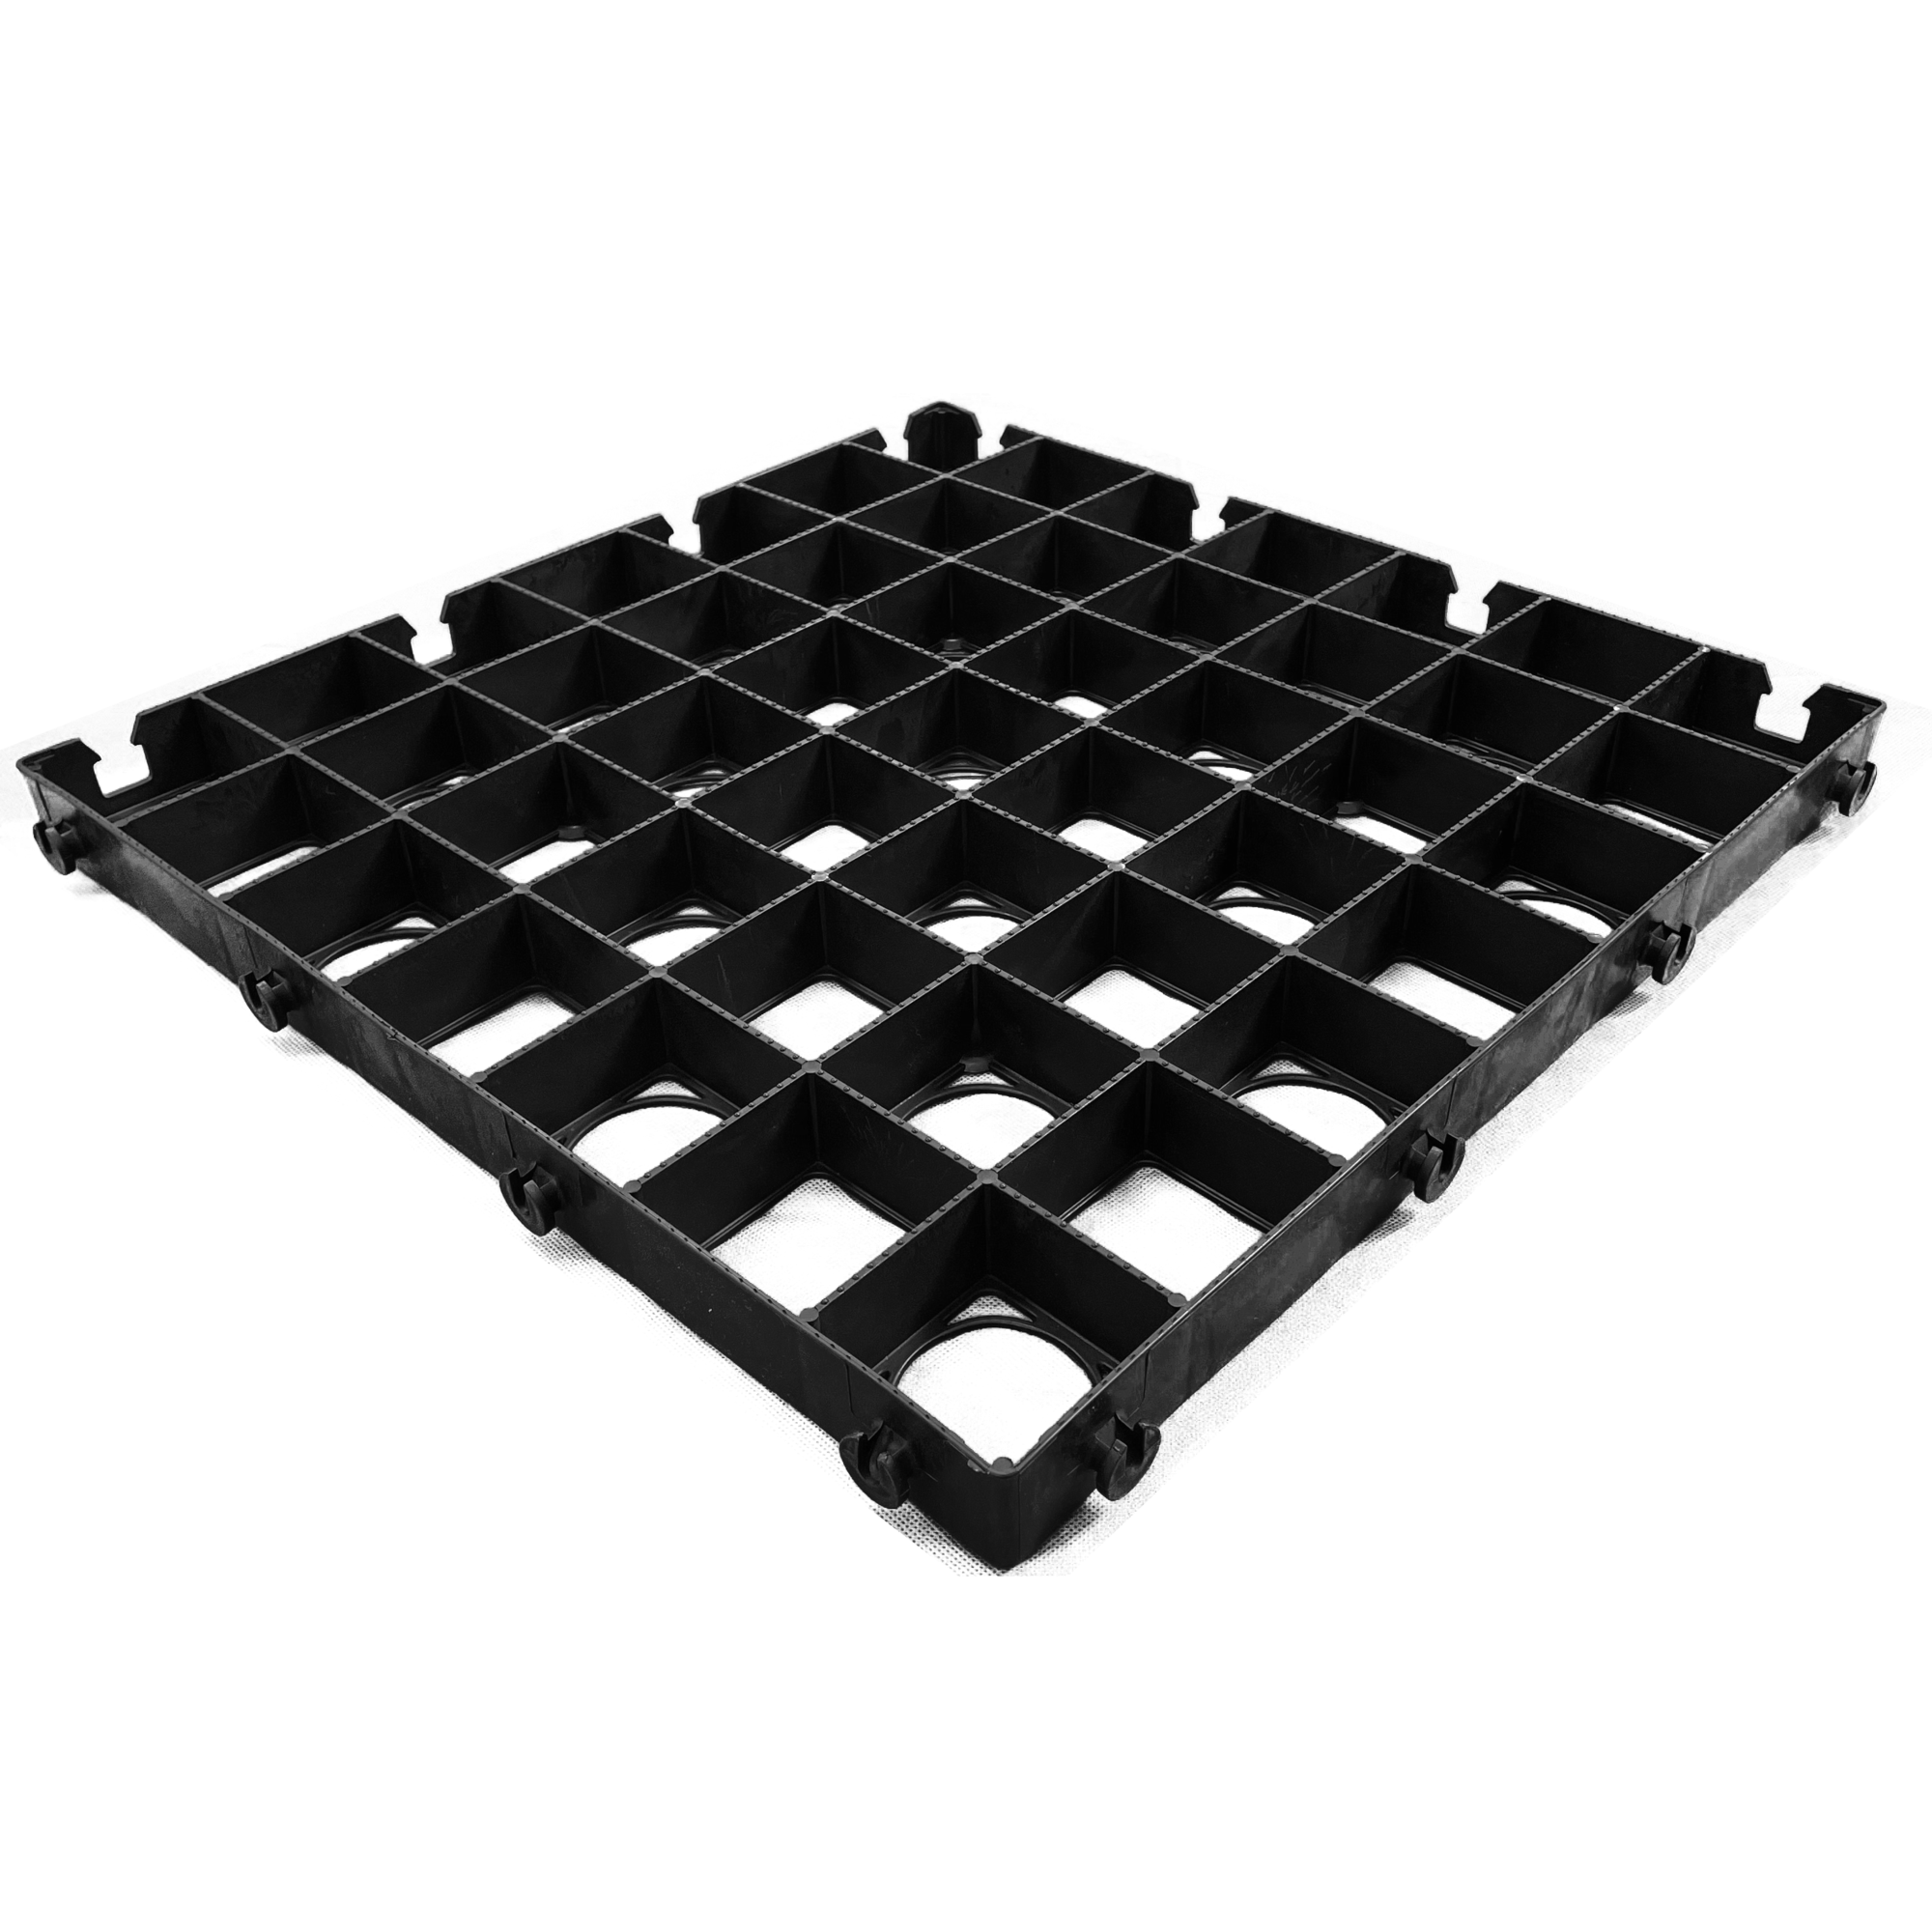 Do You Need Any Additional Parts To Fit The Grids Together?